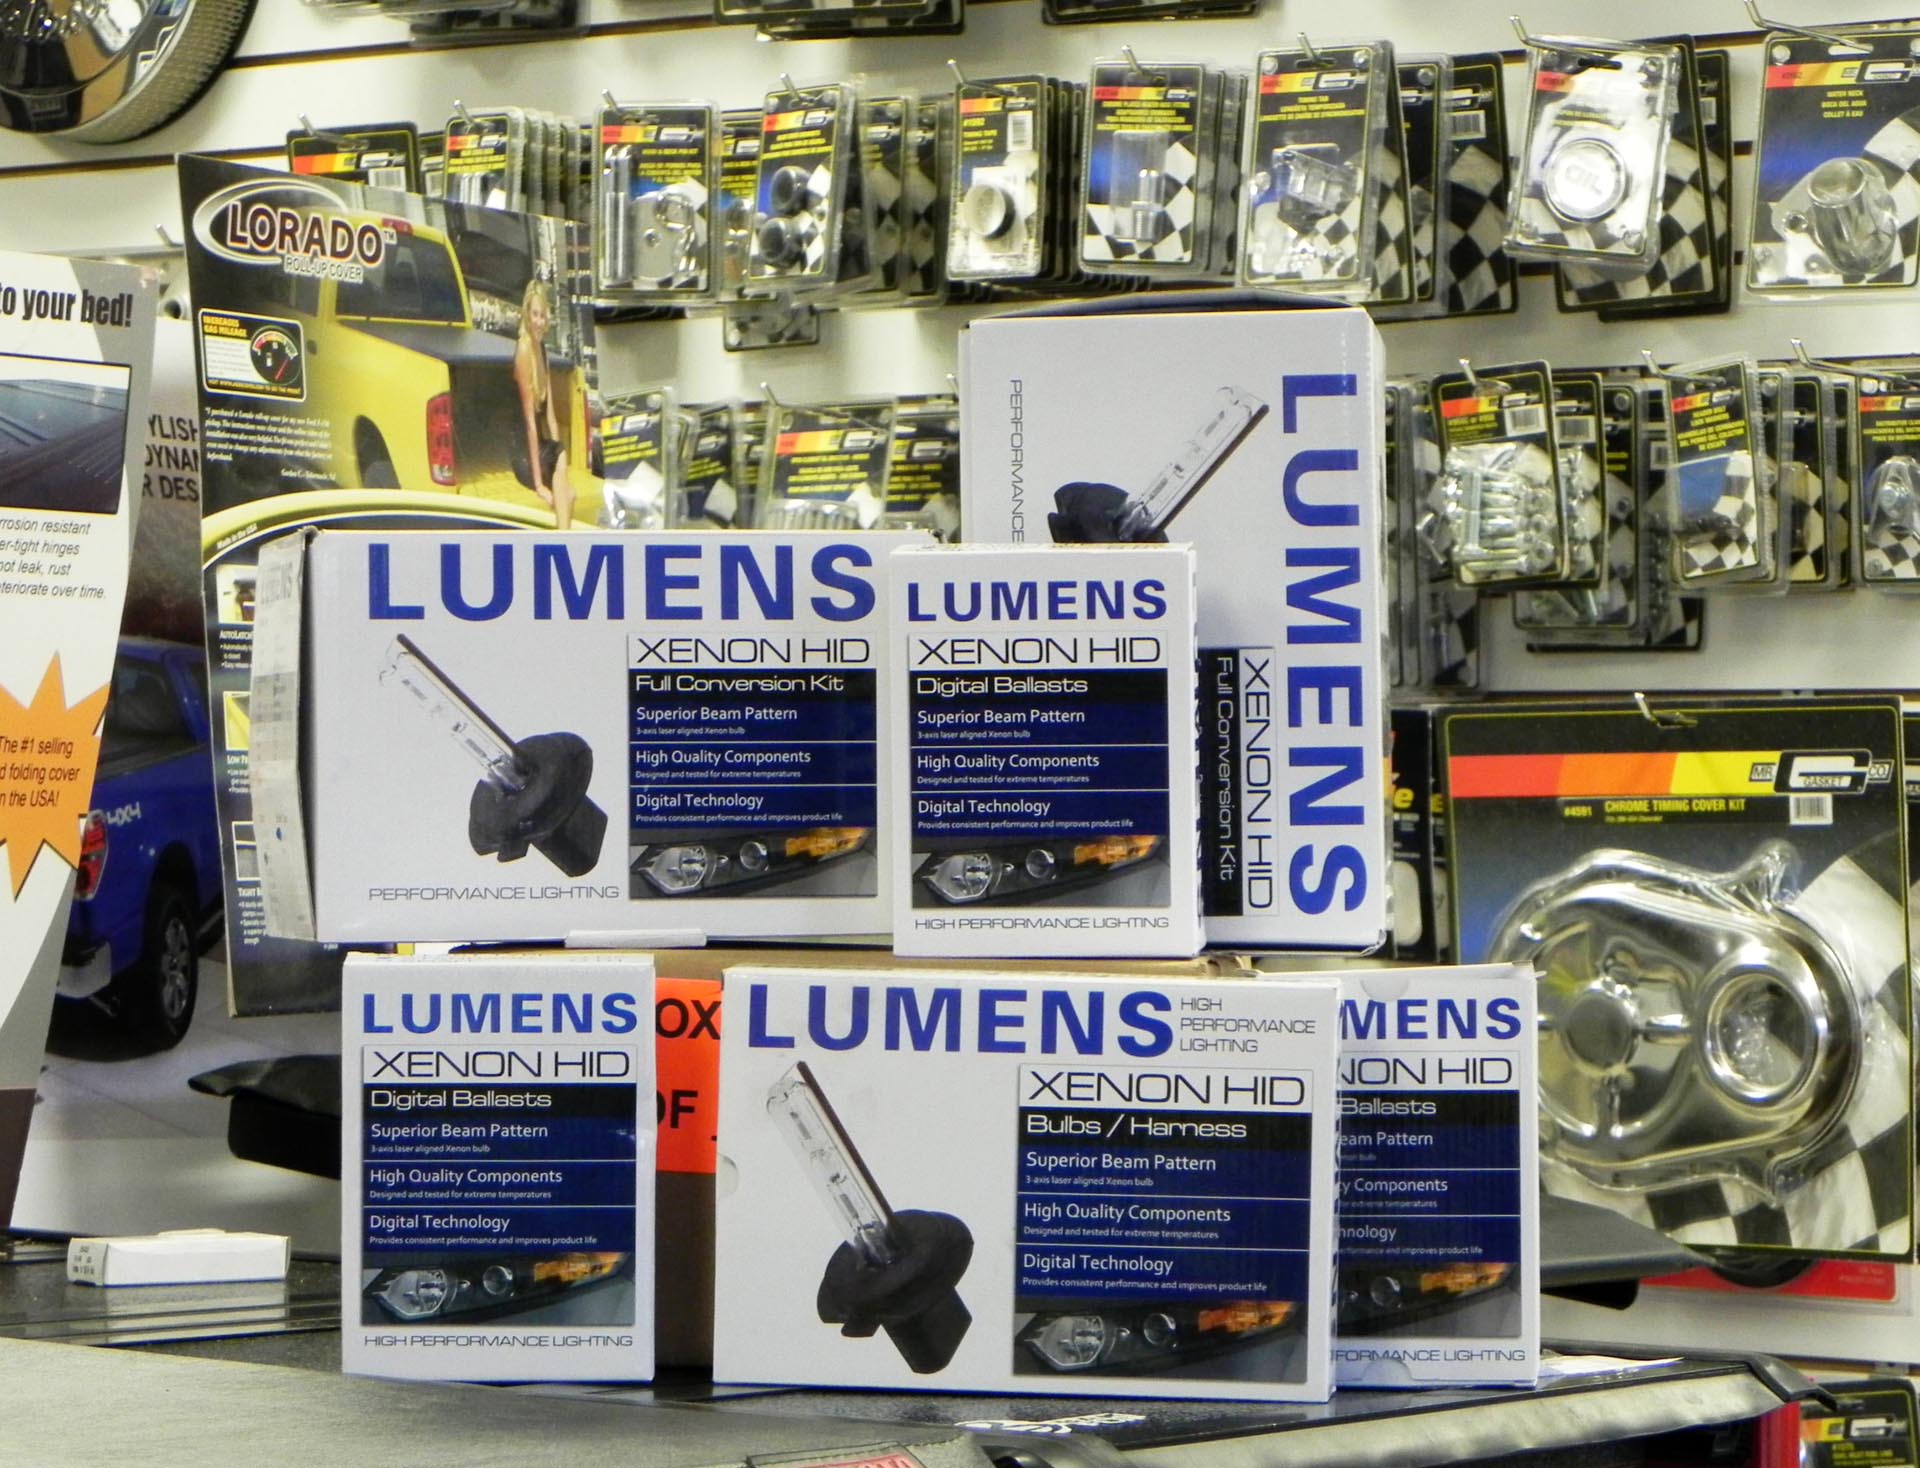 Kits like this one, from Lumens, are popular with do-it-yourself types after the look and performance of xenon lighting in a ride that doesn’t have xenon lights. Installing power ballasts and xenon lighting hardware gives the vehicle in question that signature xenon look, and, depending on the quality of the factory optics behind which the Lumens lights are installed, improved lighting output. Note that installation of non-factory lighting systems like this one may be in violation of certain laws in certain locales, so do your homework first.